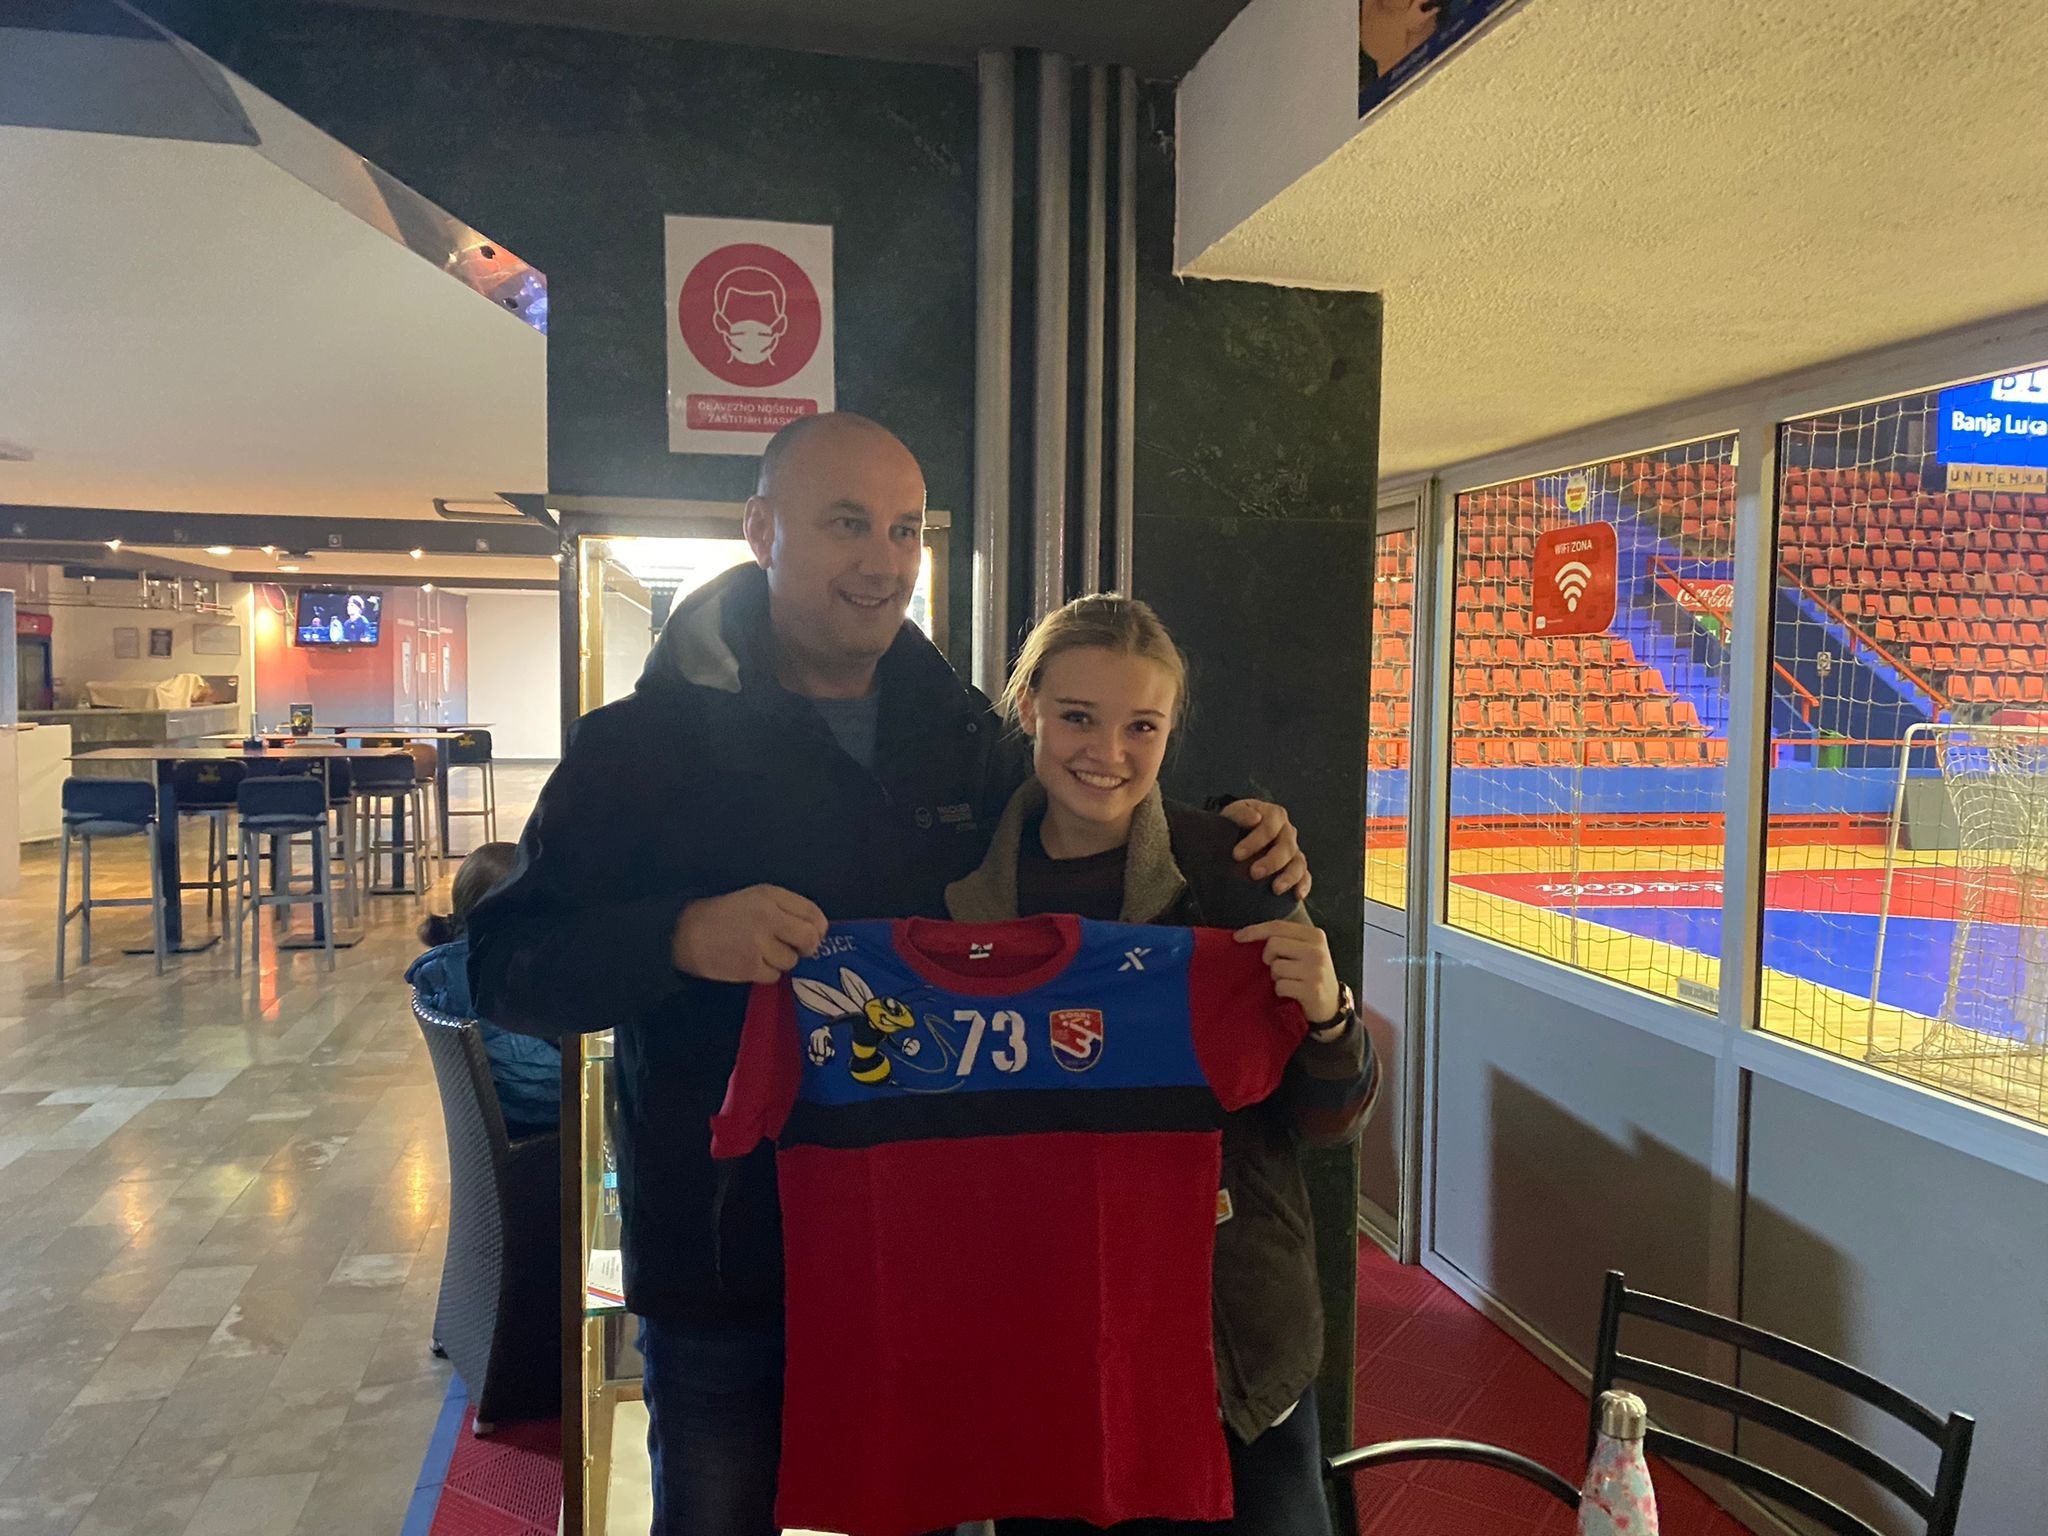 YES Abroad student, Clara standing next to her host dad and holding a Handball jersey